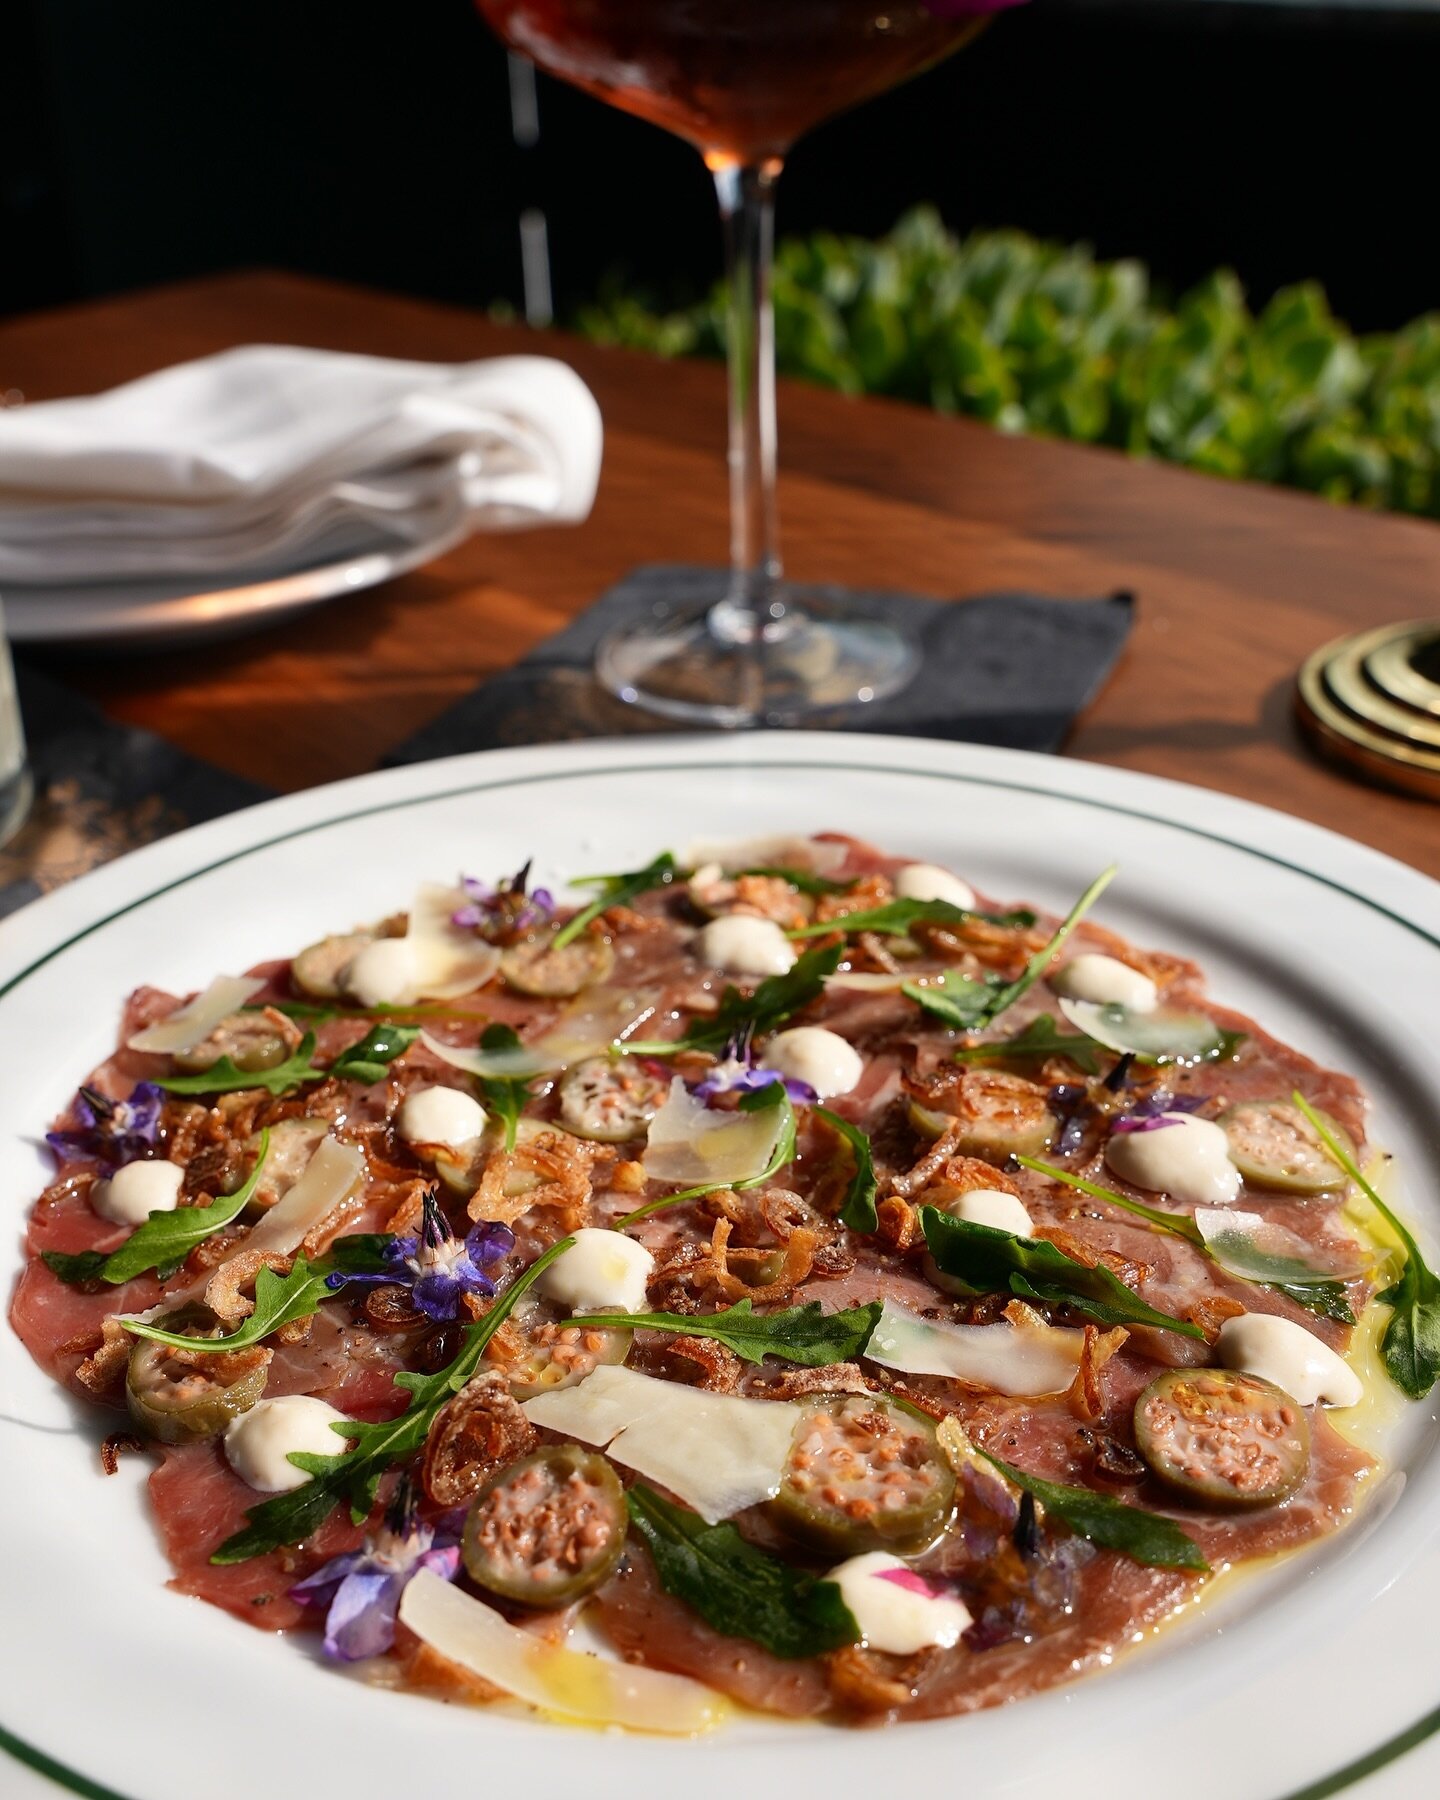 Sliced to perfection: our beef carpaccio awaits your taste.

#PureDelight #losangeles #beverlyhills #westhollywood #beefcarpaccio #delicious